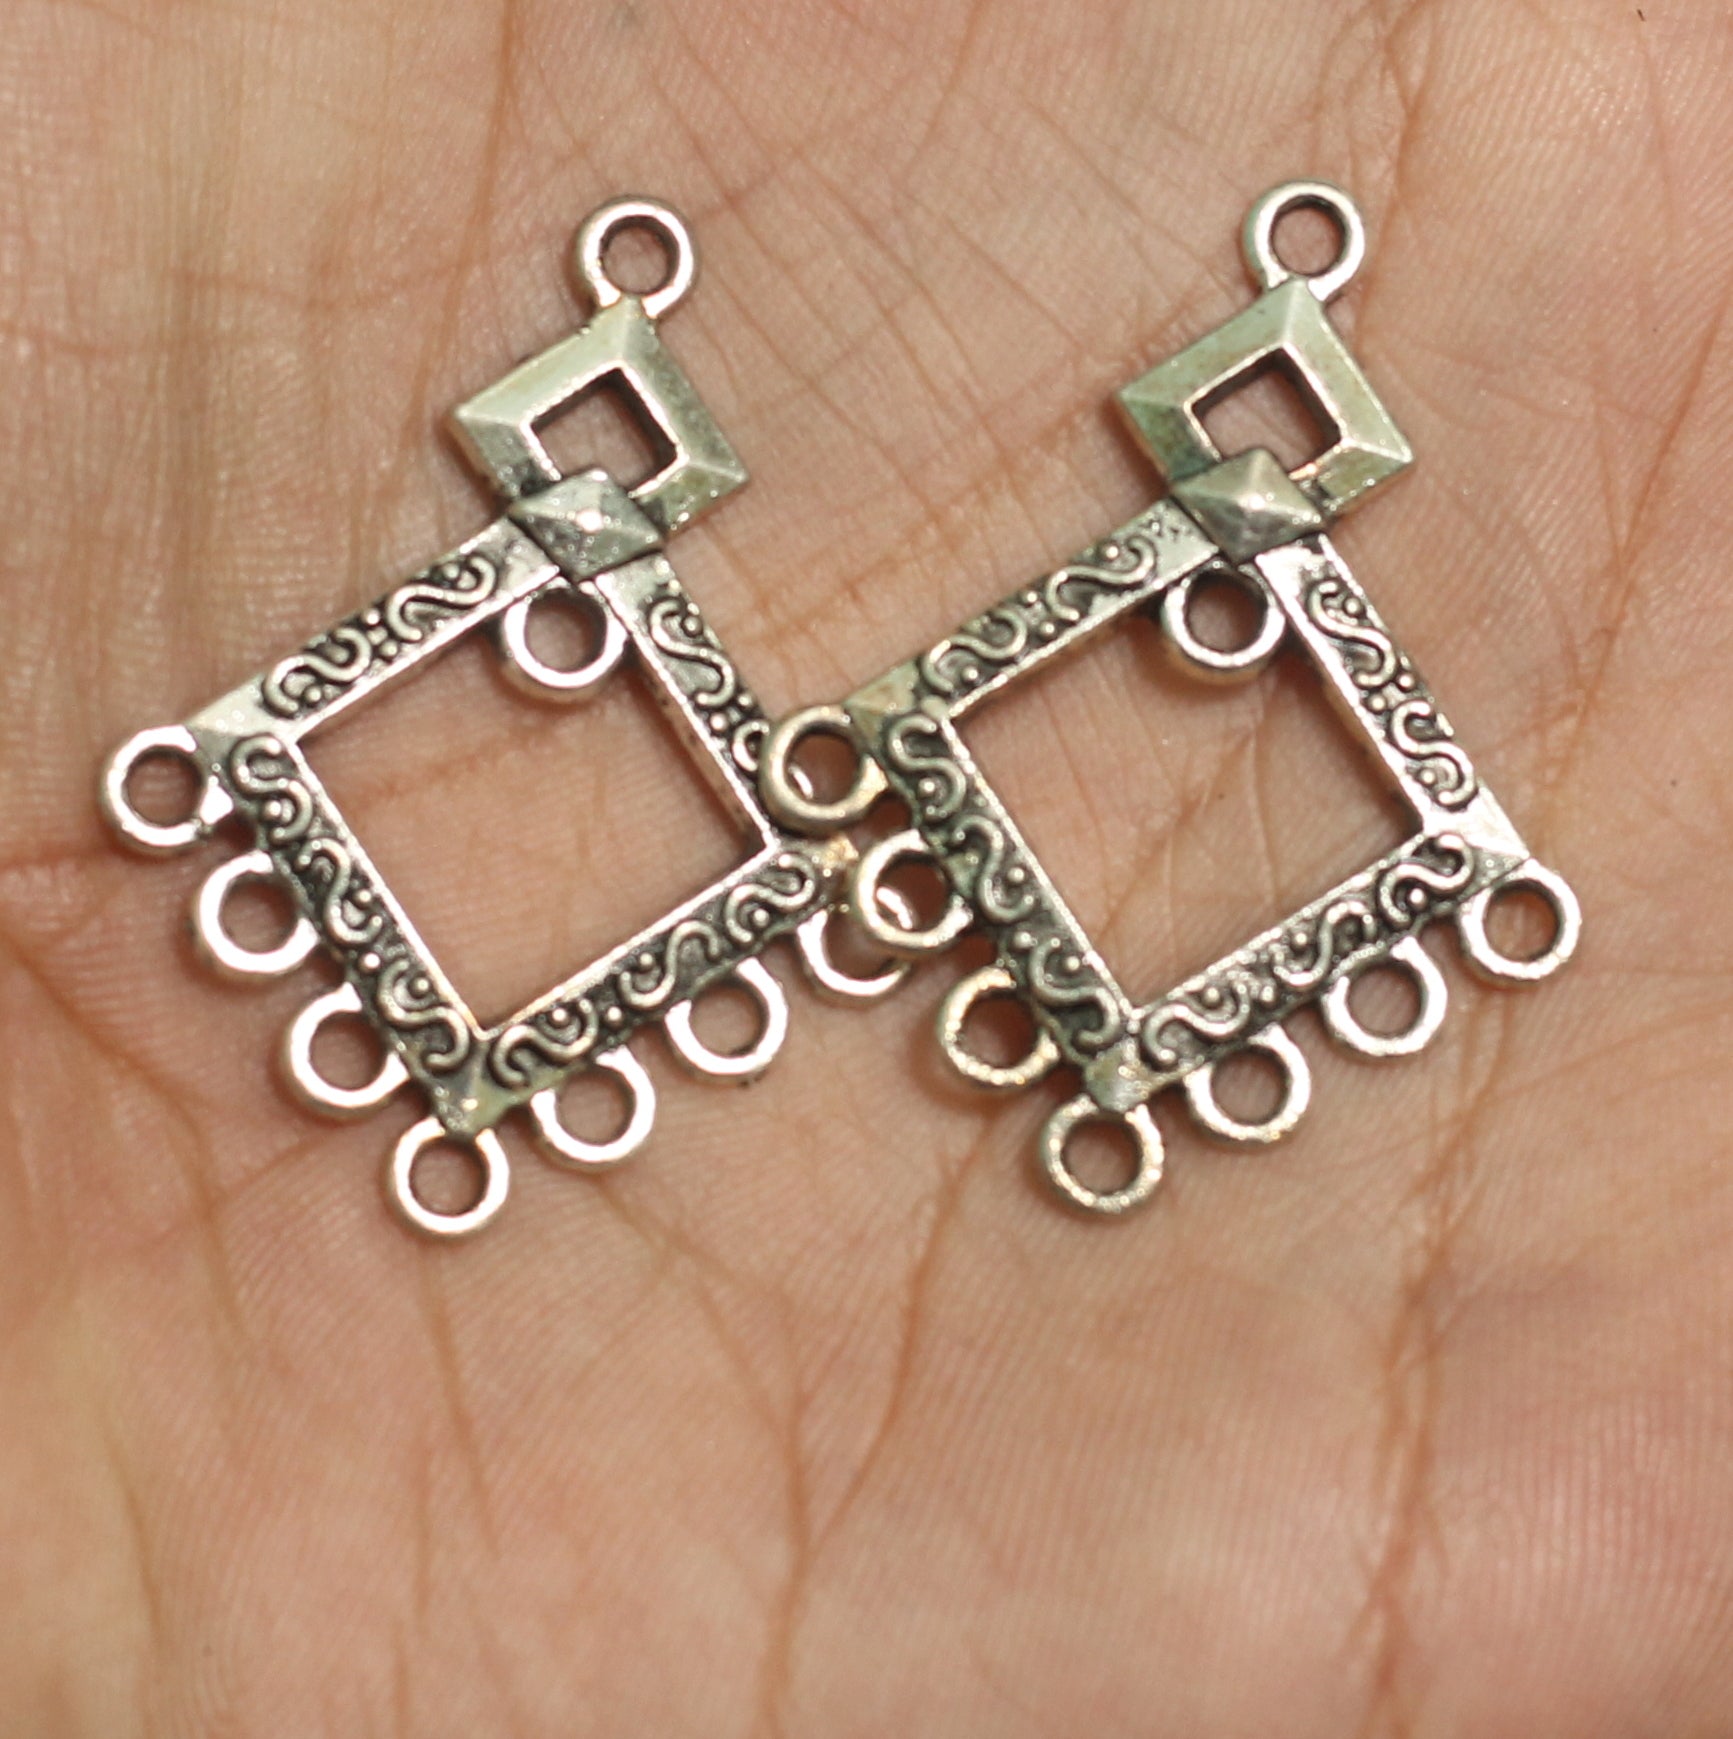 Silver Earring Components 40mm